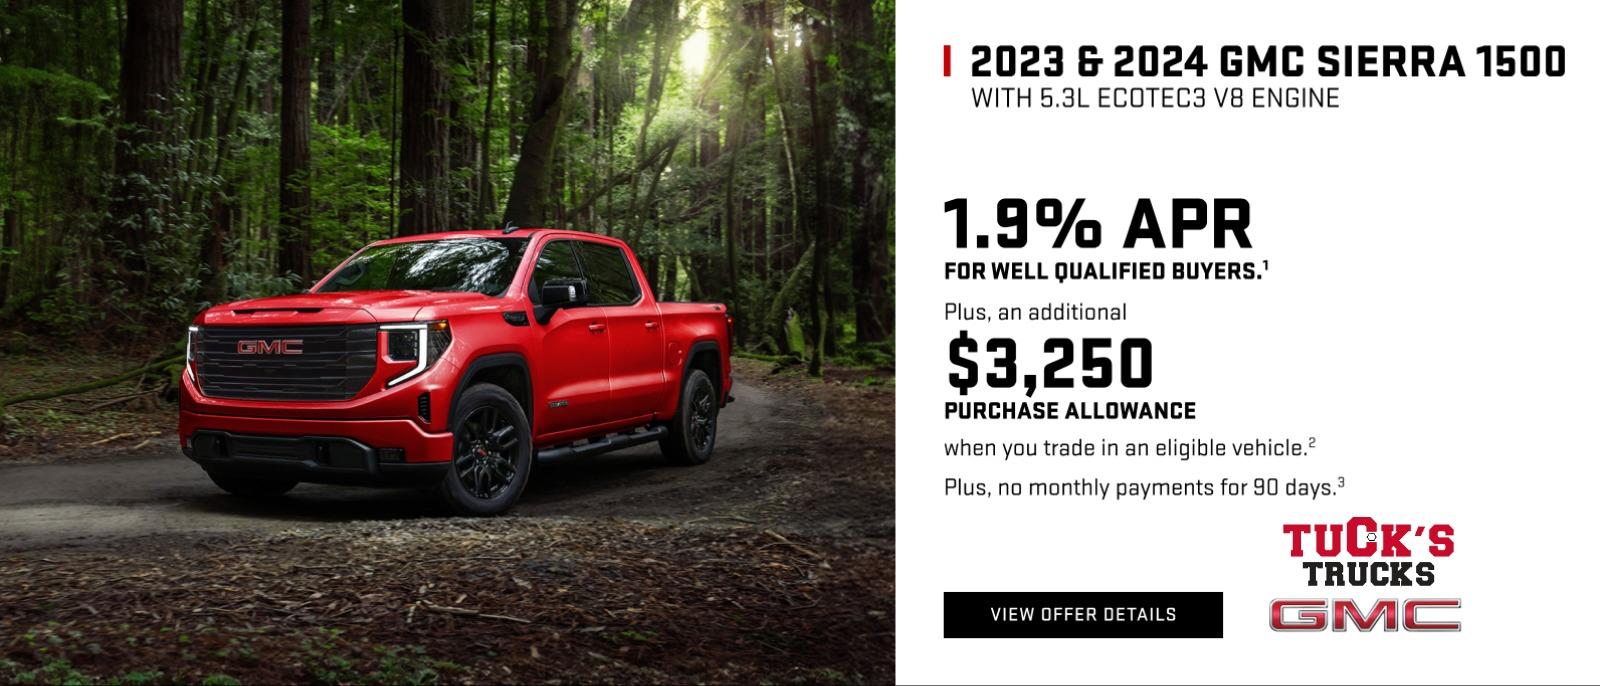 1.9% APR for well-qualified buyers. Plus, an additional $3,250 PURCHASE ALLOWANCE when you trade in an eligible vehicle. Plus, no monthly payments for 90 days.